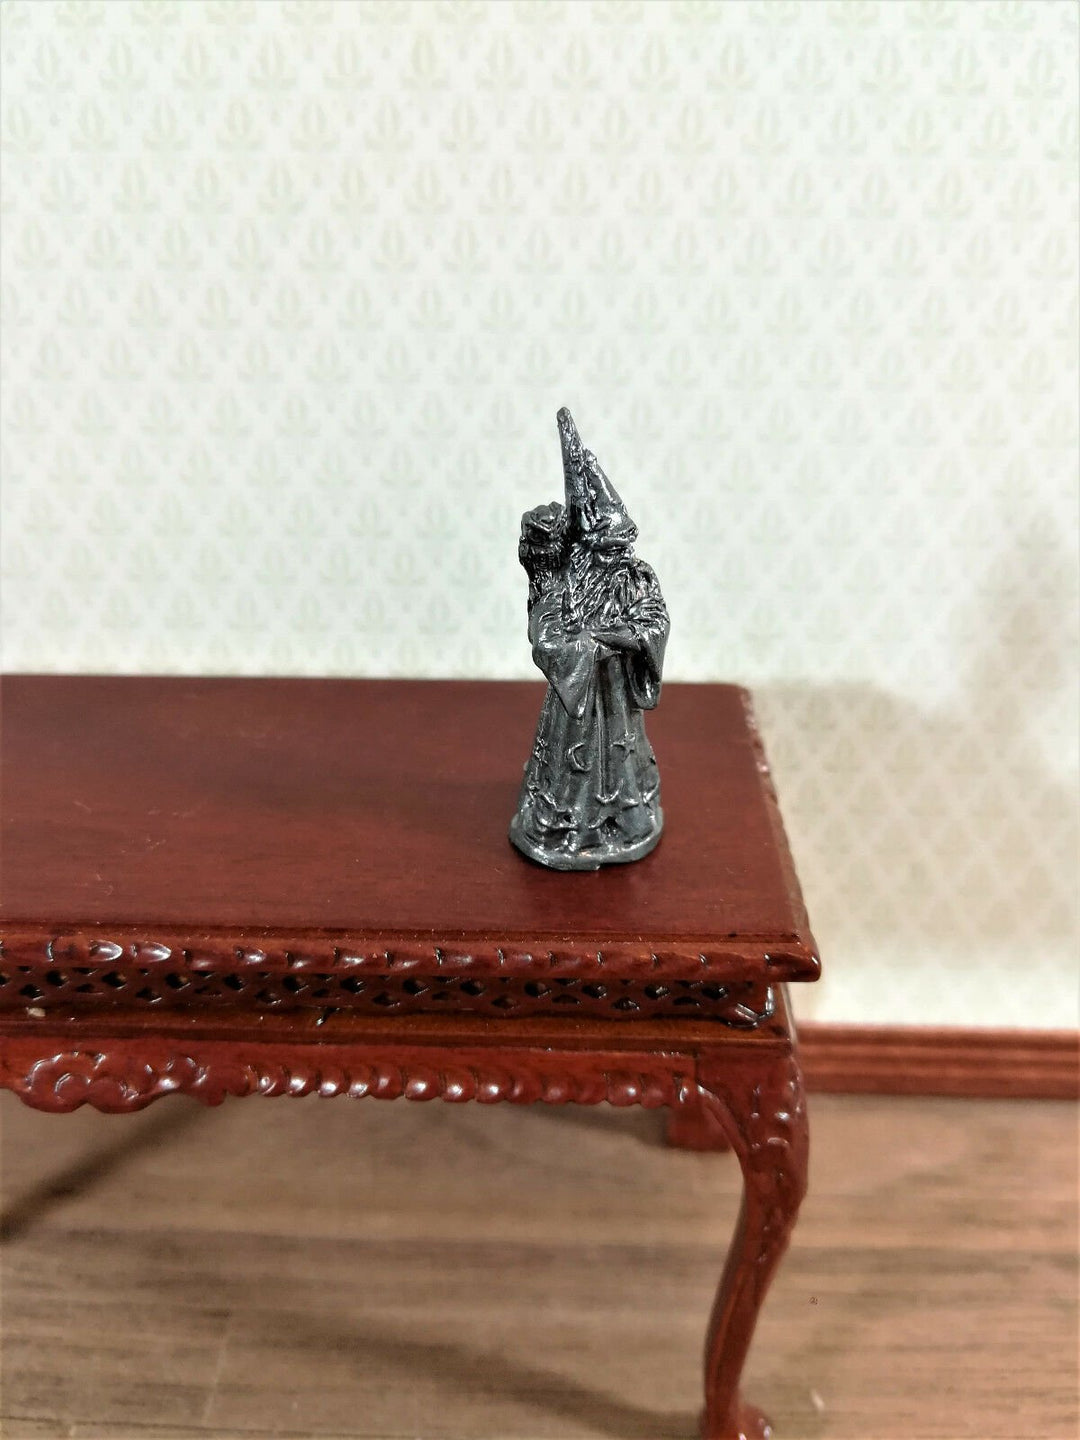 Dollhouse Miniature Wizard with Owl Statue Robed Bearded 1:12 Scale 1 1/4" Tall - Miniature Crush